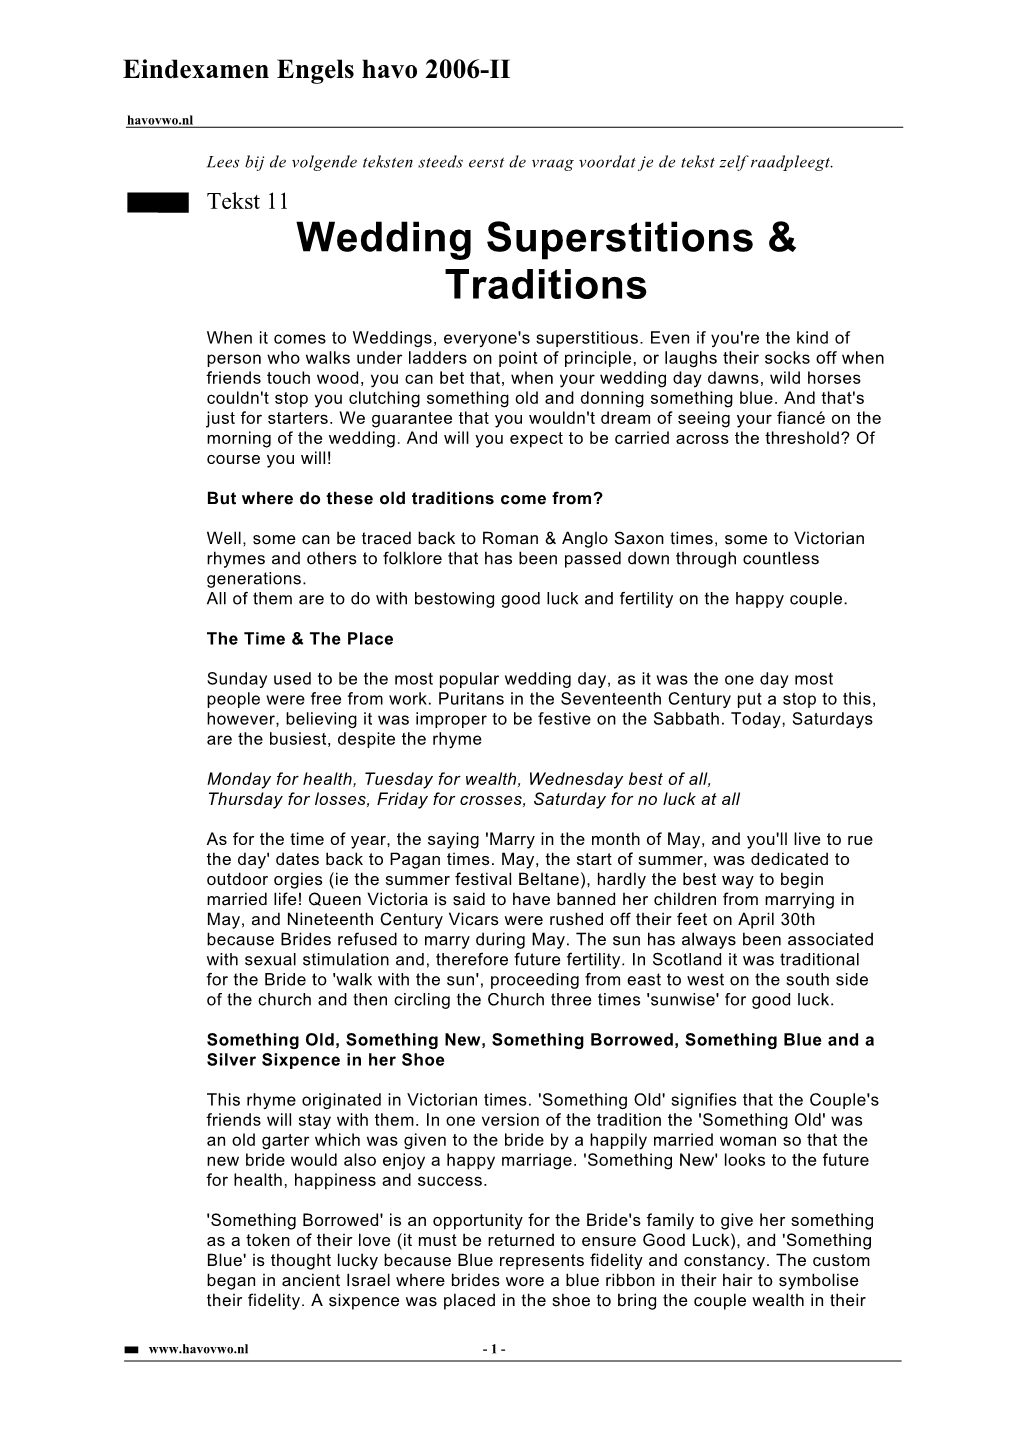 Wedding Superstitions & Traditions